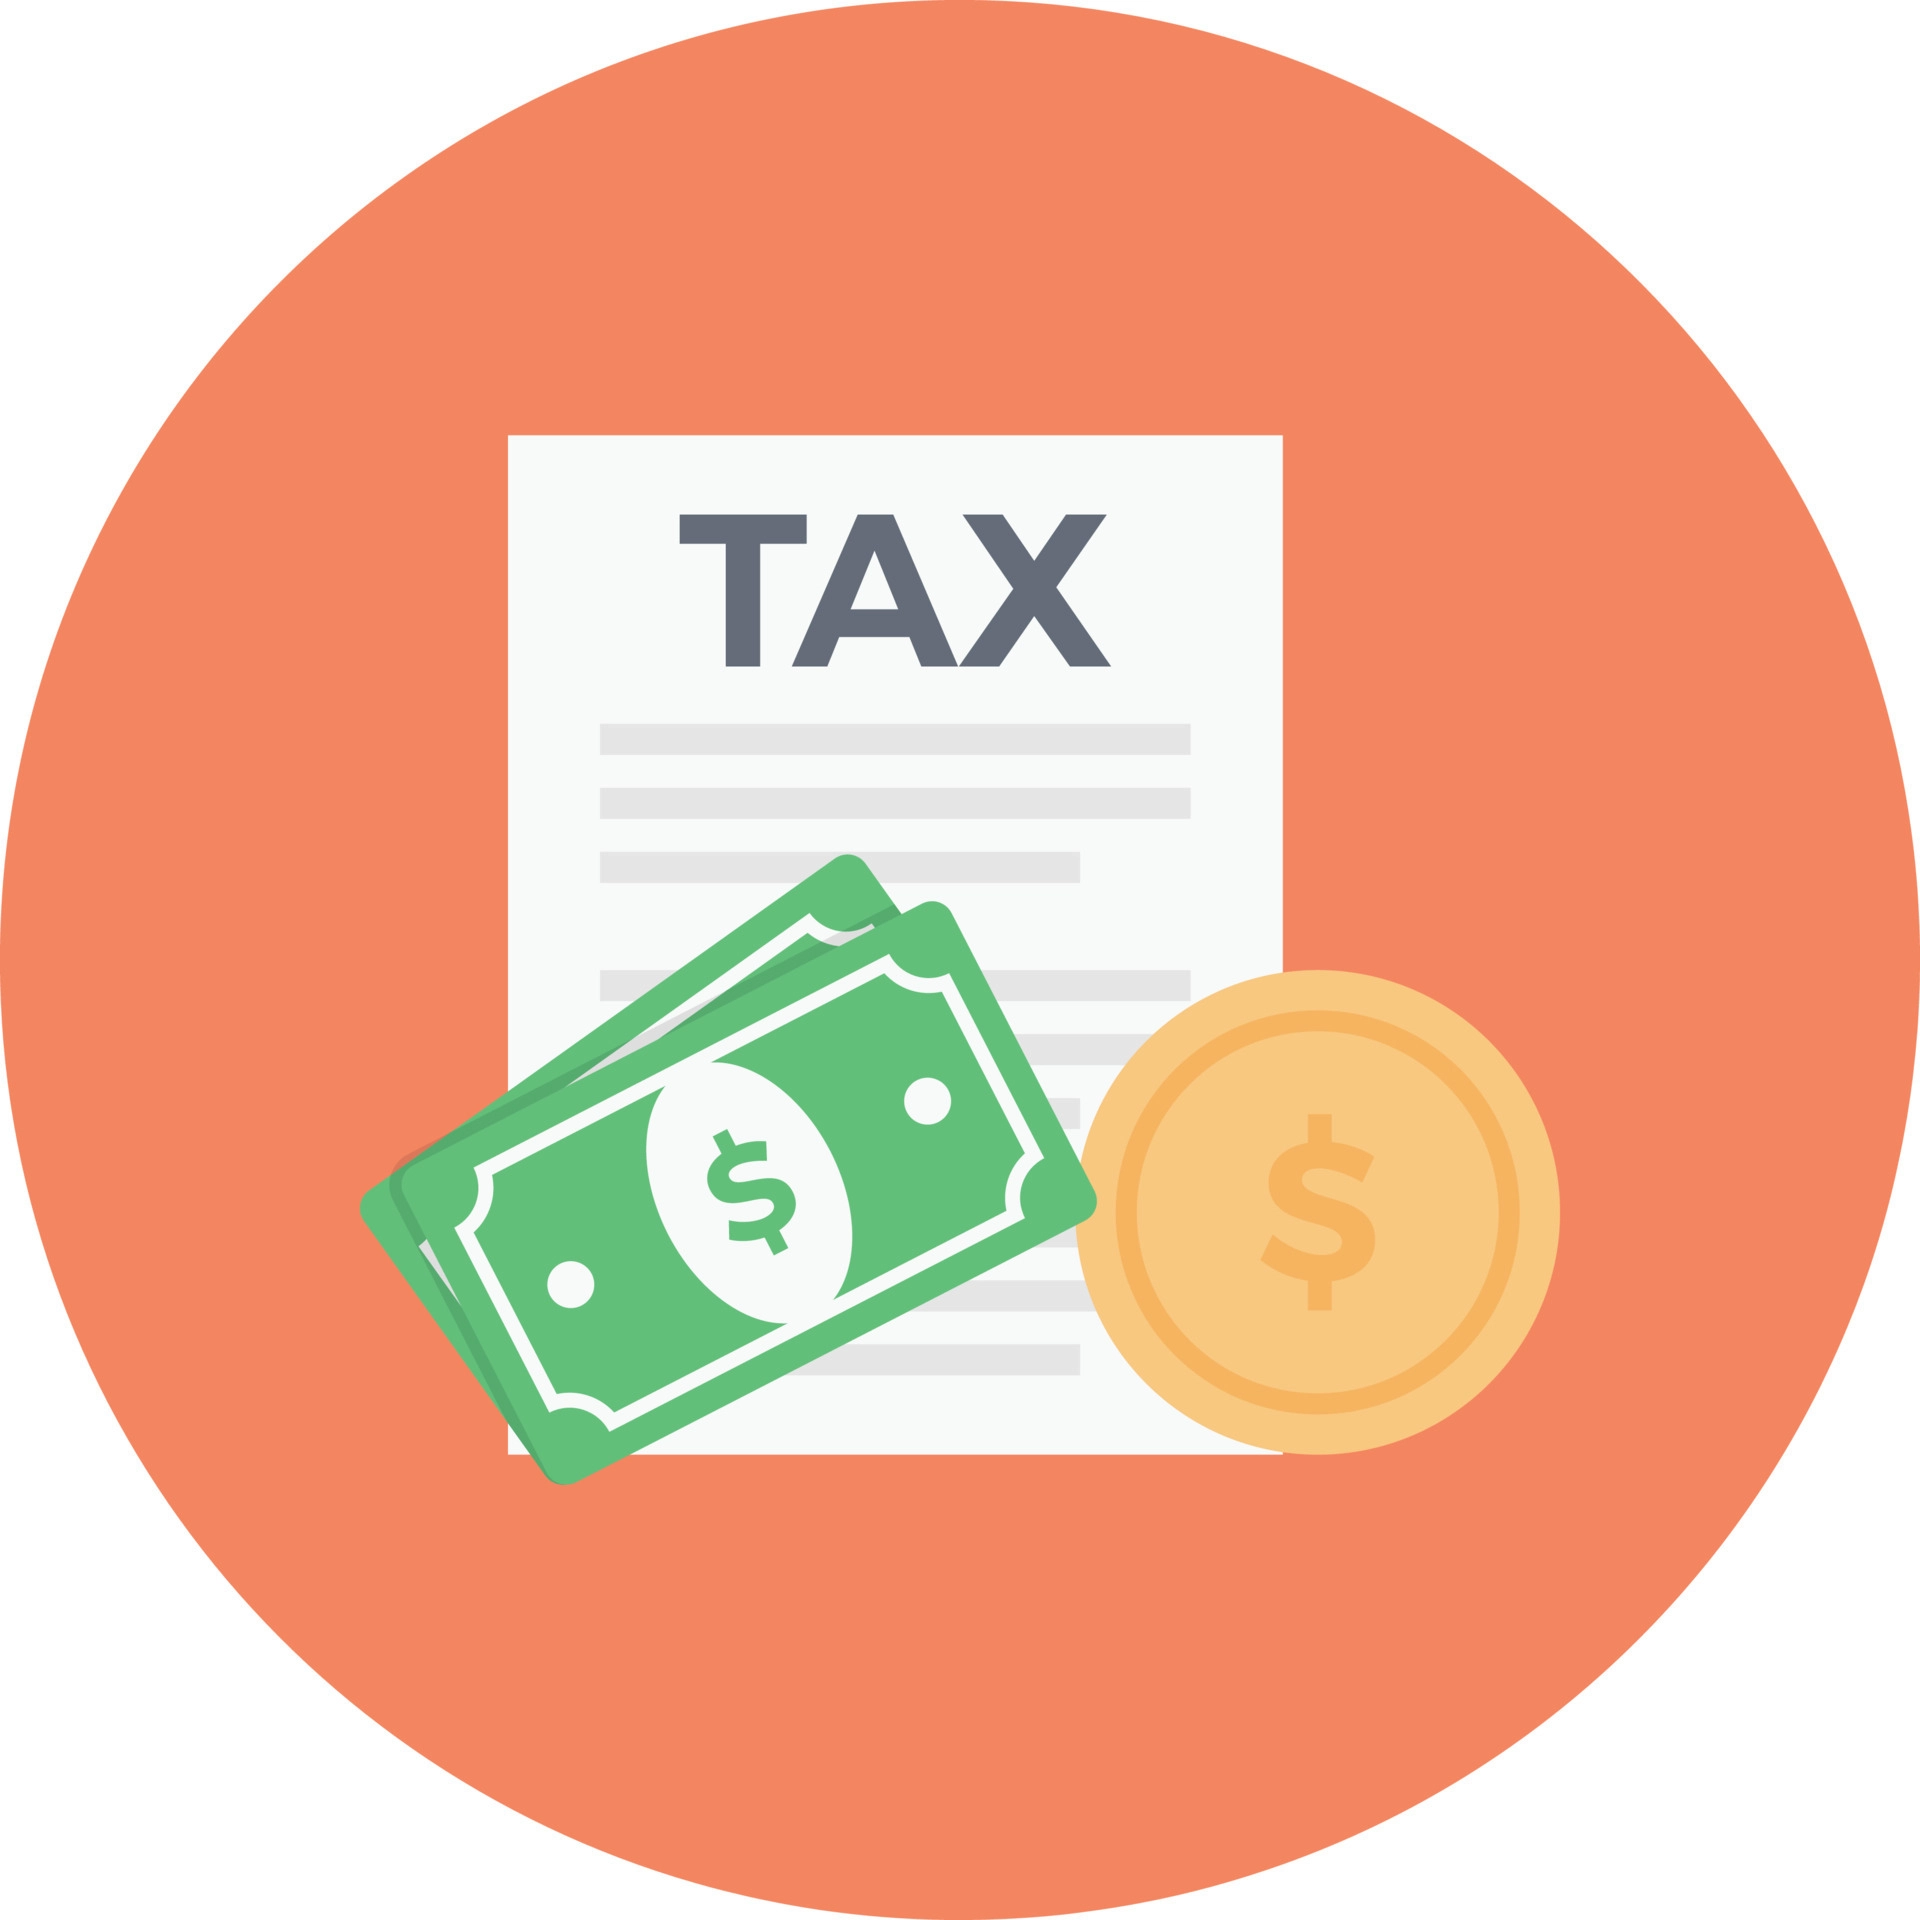 tax-payment-circle-flat-icon-vector